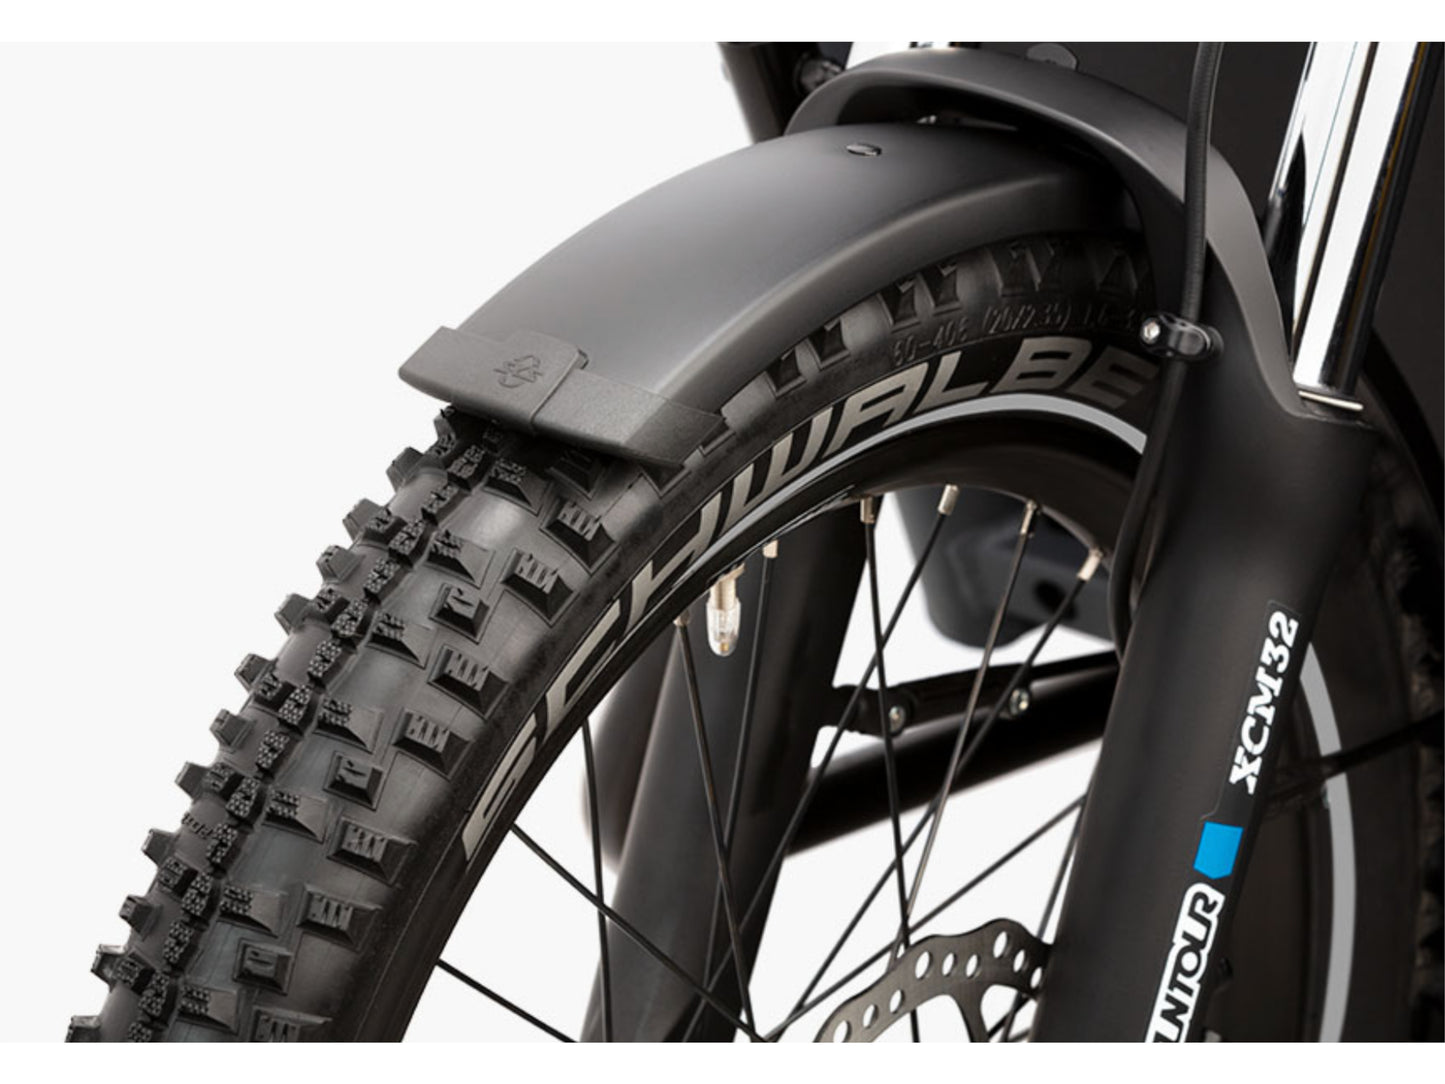 Riese & Muller Load4 75 Touring eMtb full suspension close up gx option